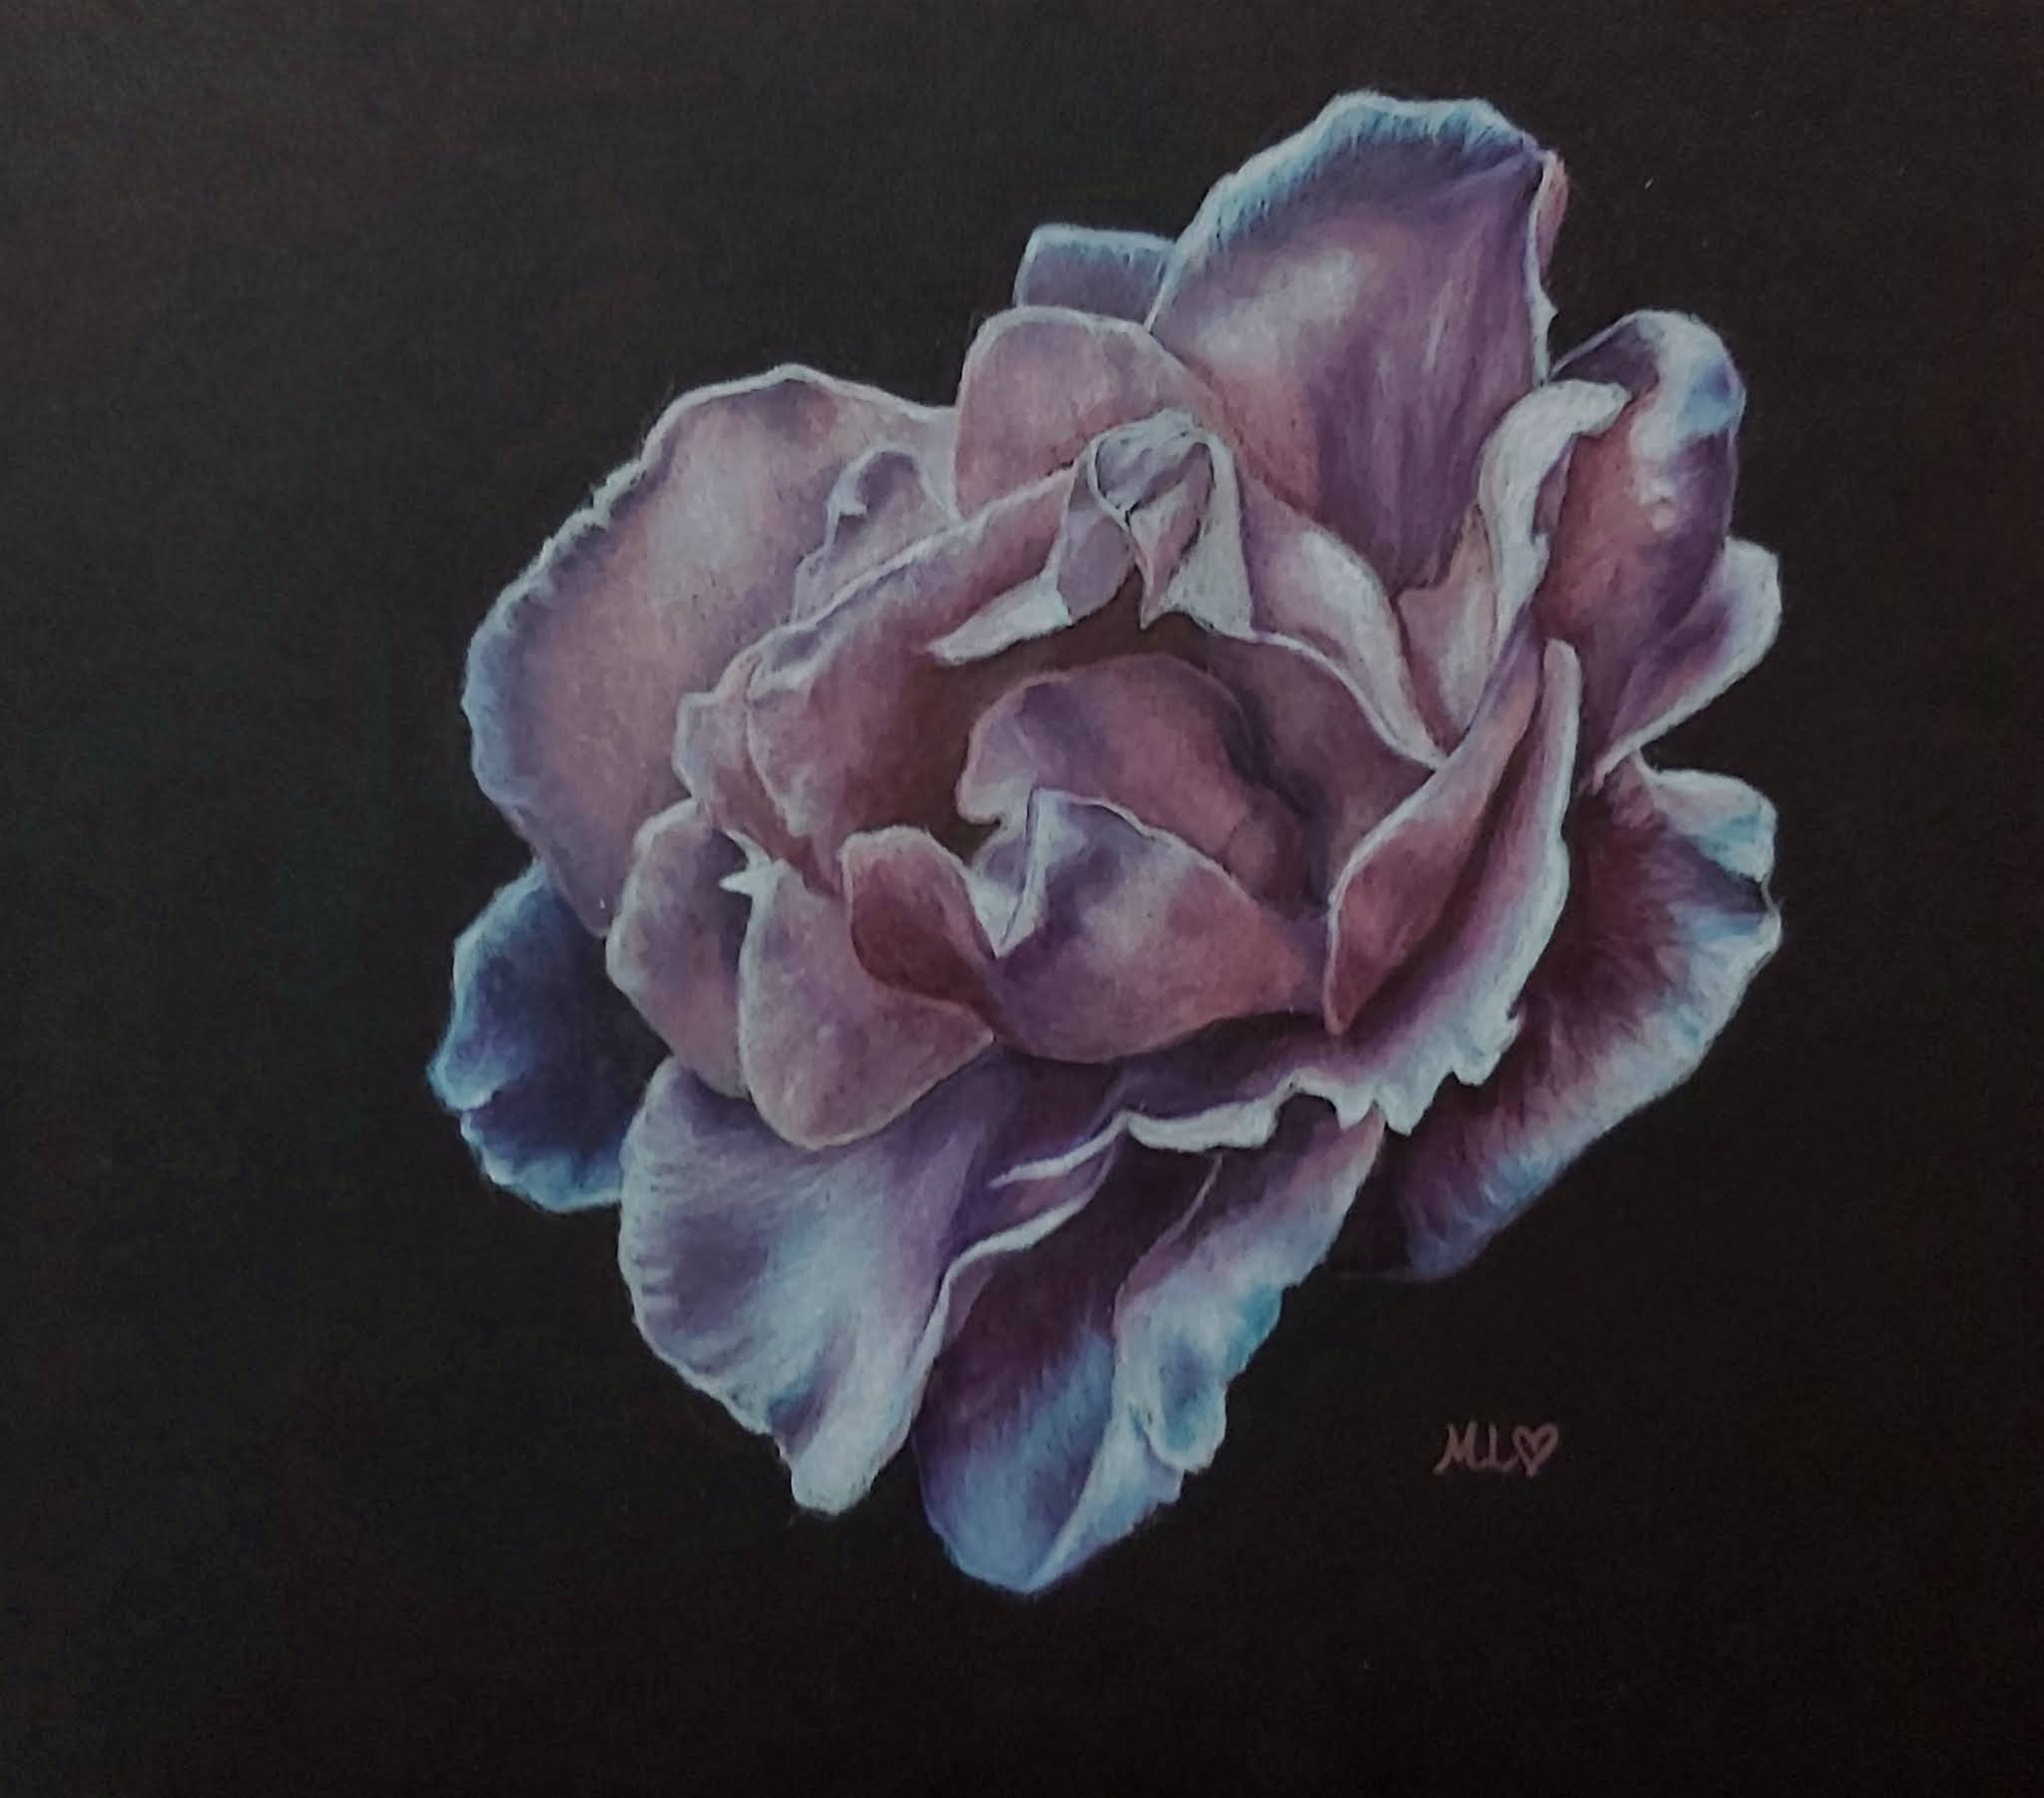 Using coloured pencils on black paper